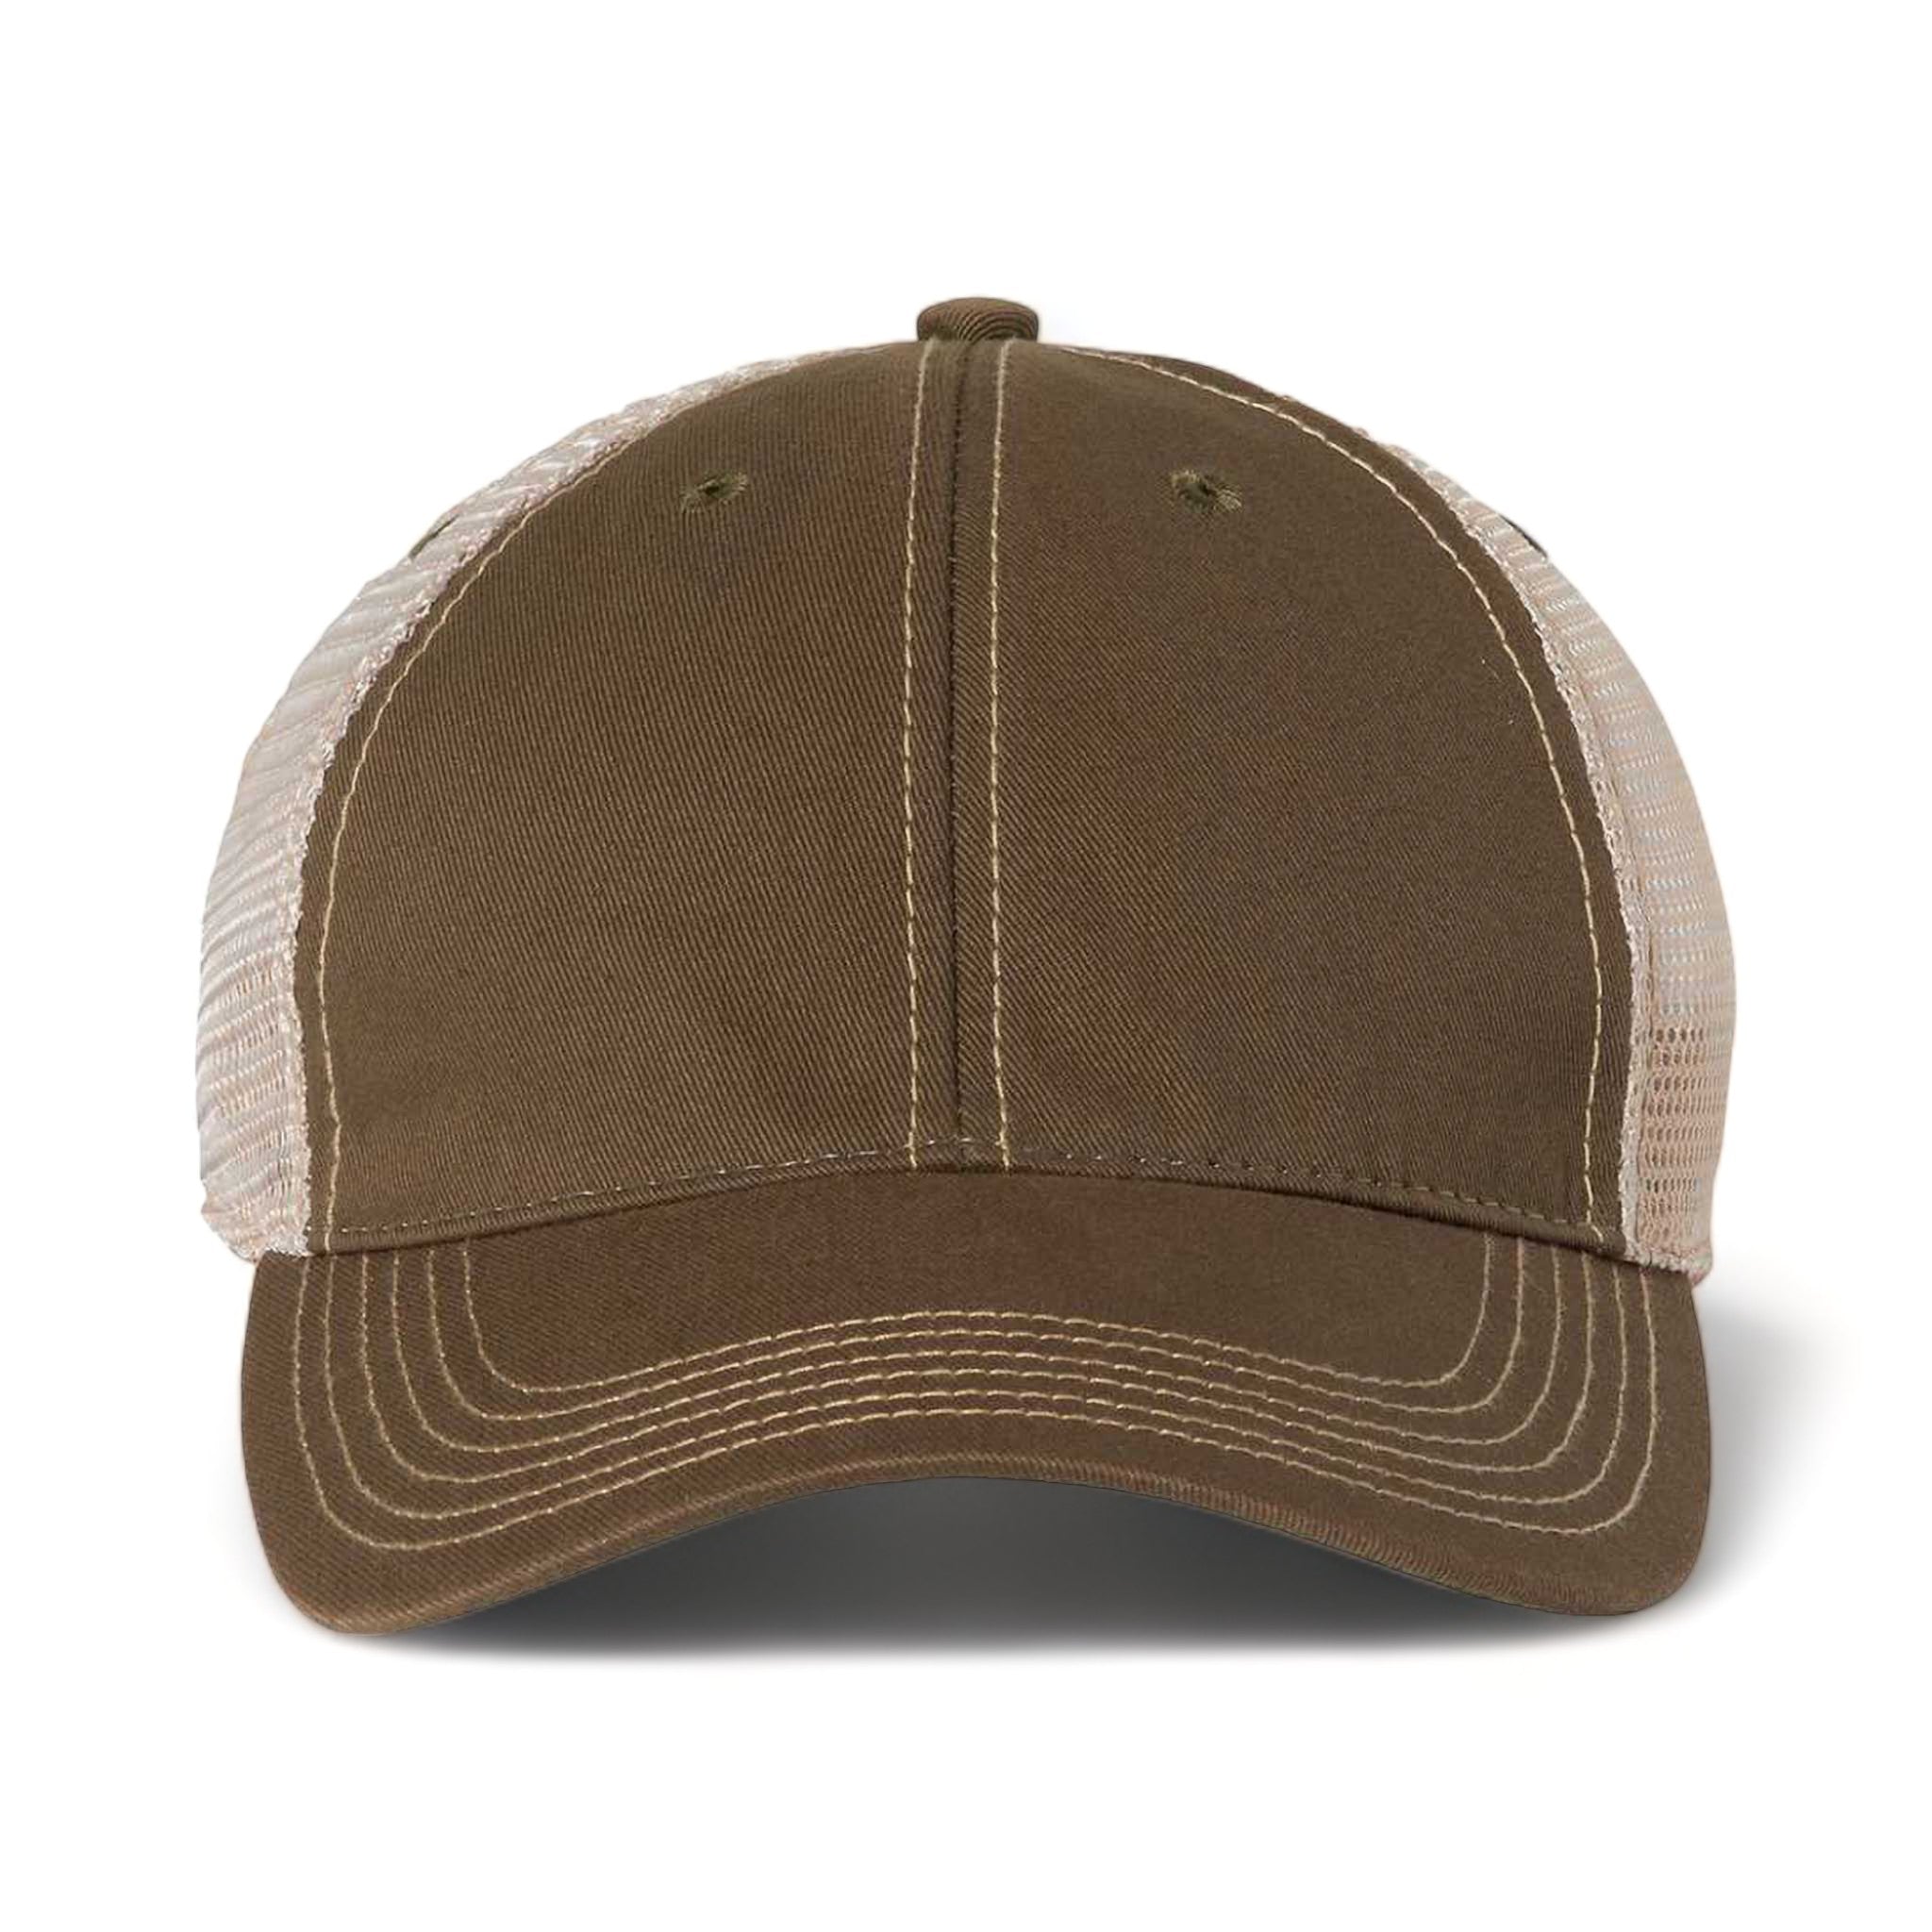 Front view of LEGACY OFA custom hat in olive and khaki